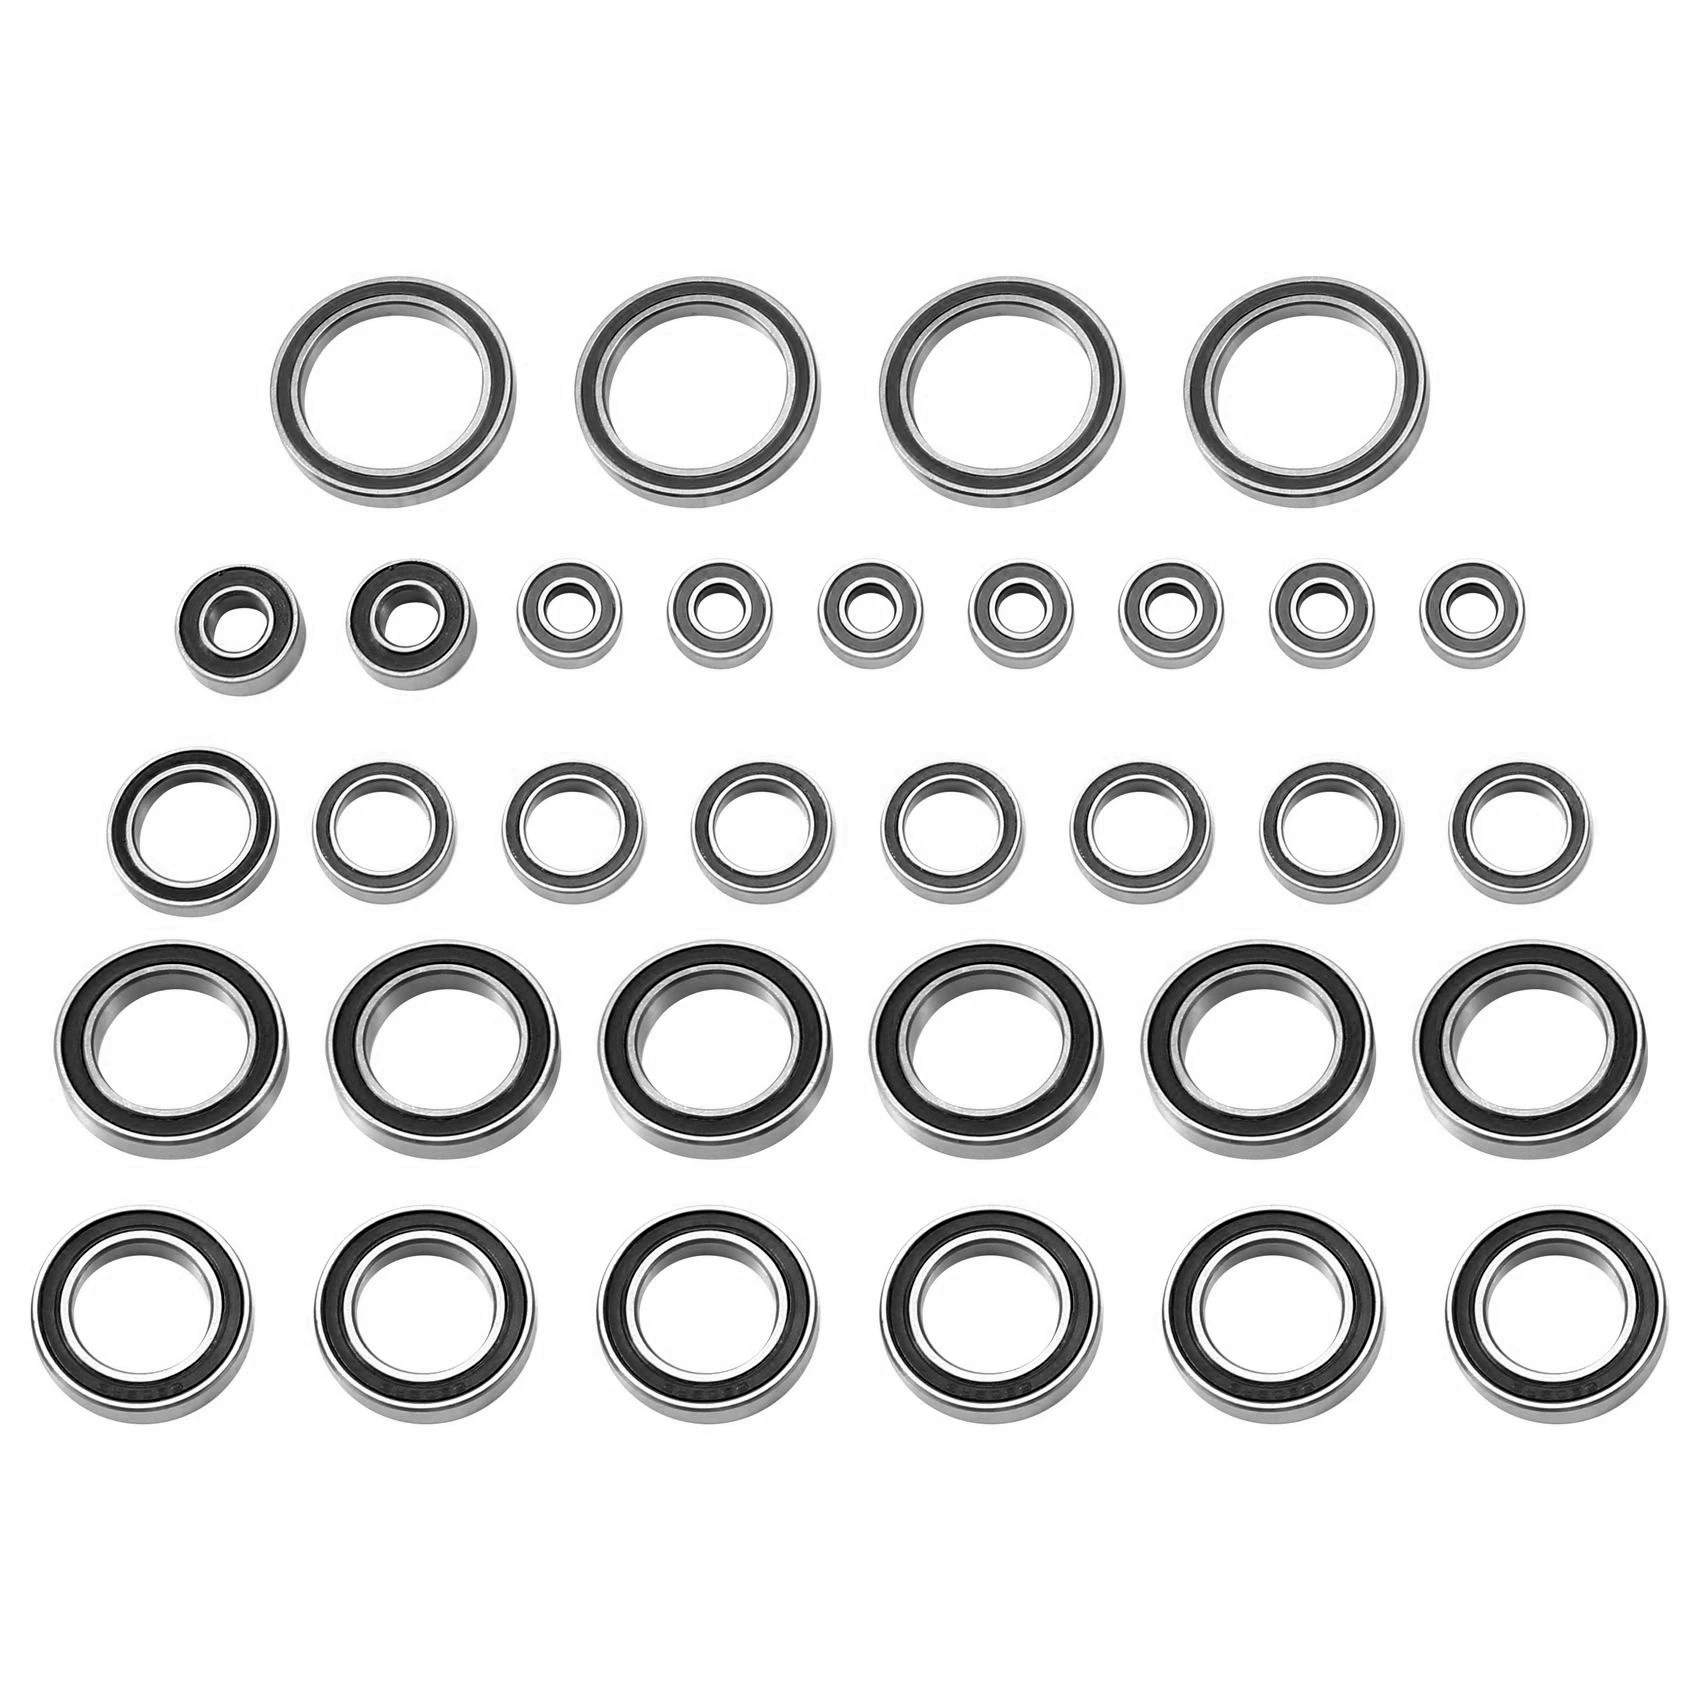 

33pcs Rubber Sealed Steel Ball Bearing Kit for 1/5 Traxxas X-Maxx XMAXX 8S RC Car Upgrade Parts Accessories